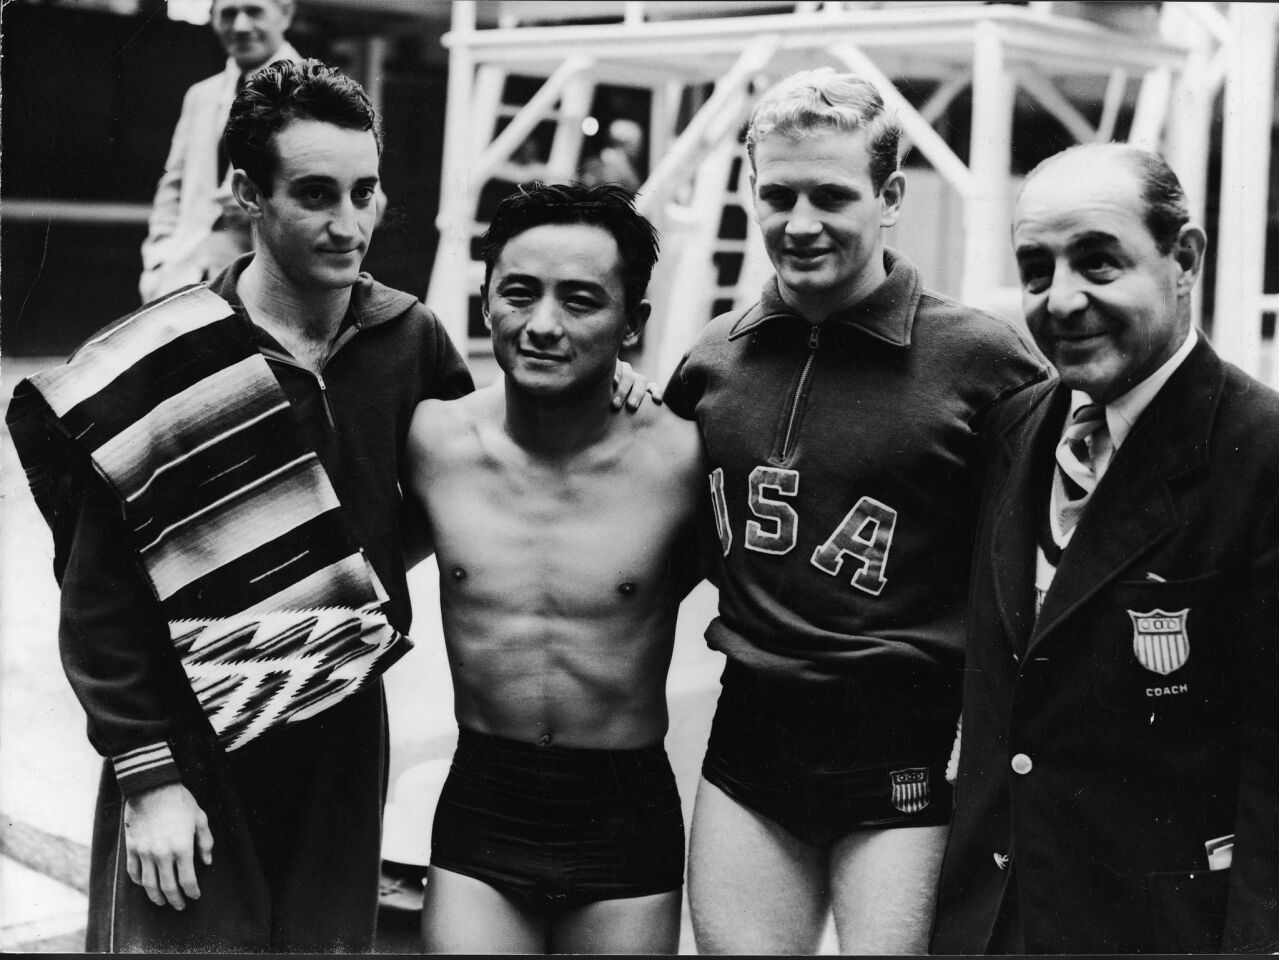 The winners of the 1948 Olympic men's 10-meter platform diving competition — from left, bronze-medal winner Joaquin Capilla Perez of Mexico, gold medalist Sammy Lee of the USA and silver medalist Bruce Ira Harlan of the USA — are joined by U.S. Coach Mike Peppe.